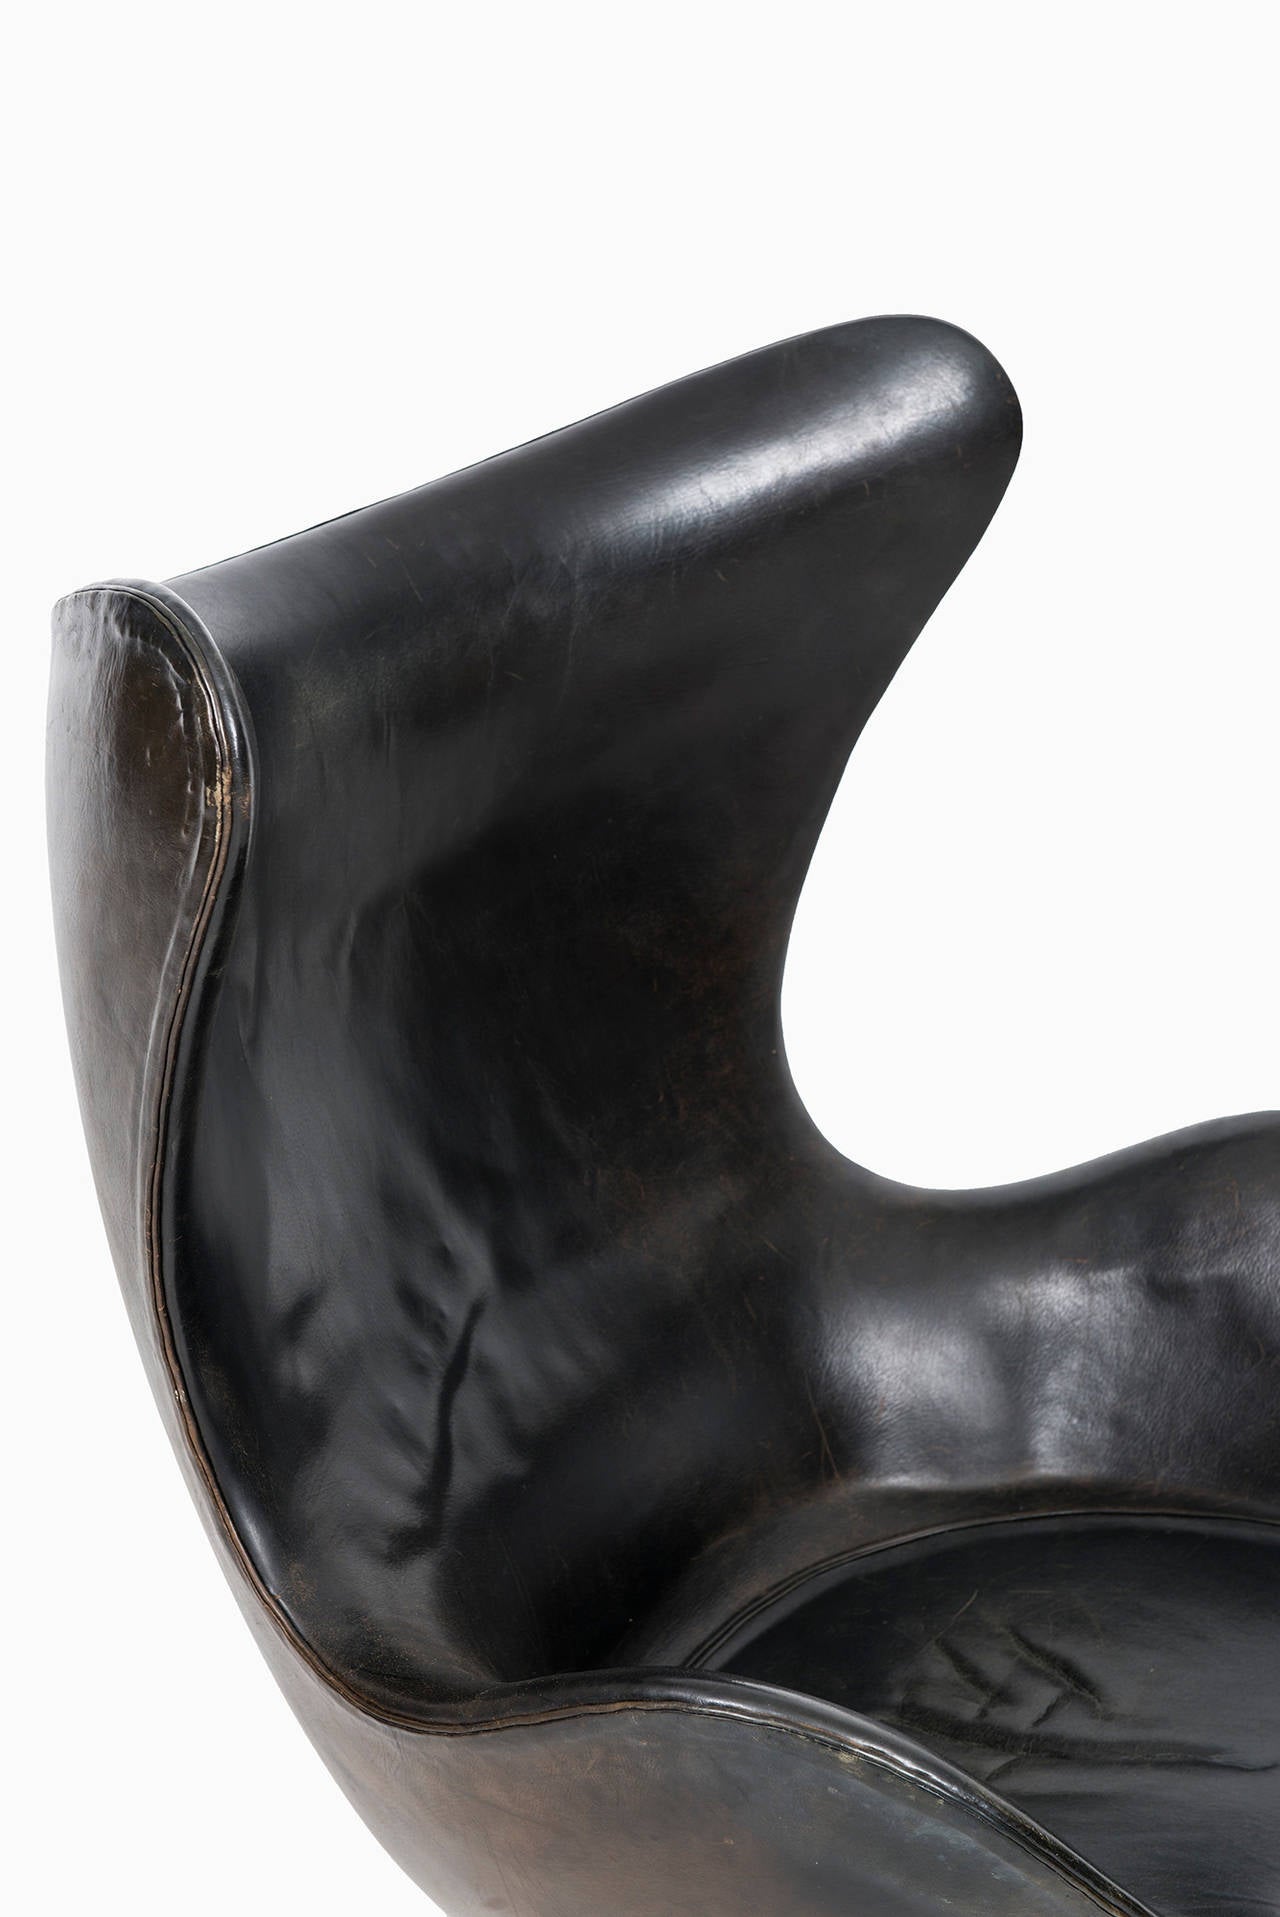 Mid-20th Century Arne Jacobsen Early Egg Chair in Original Black Leather by Fritz Hansen